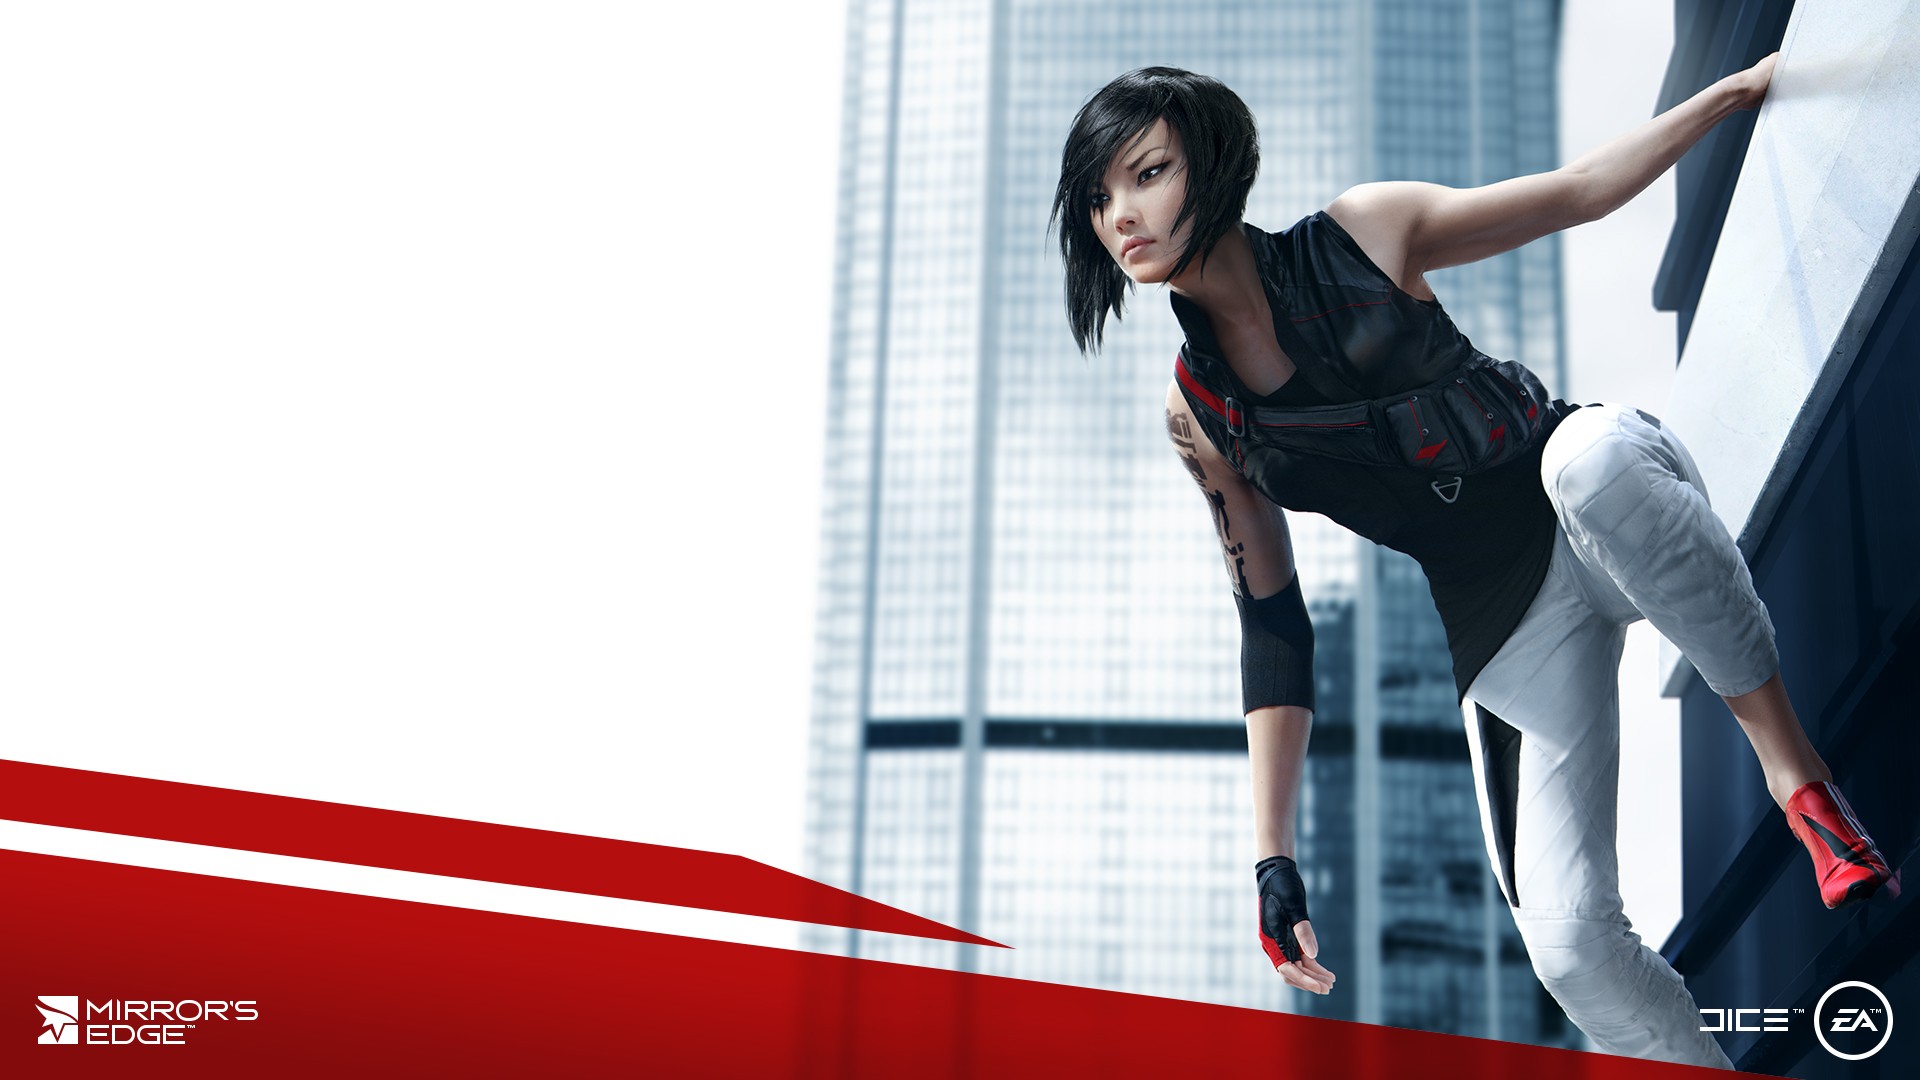 General 1920x1080 Mirror's Edge video games Electronic Arts digital art 2008 (Year) Faith Connors video game art video game girls EA DICE